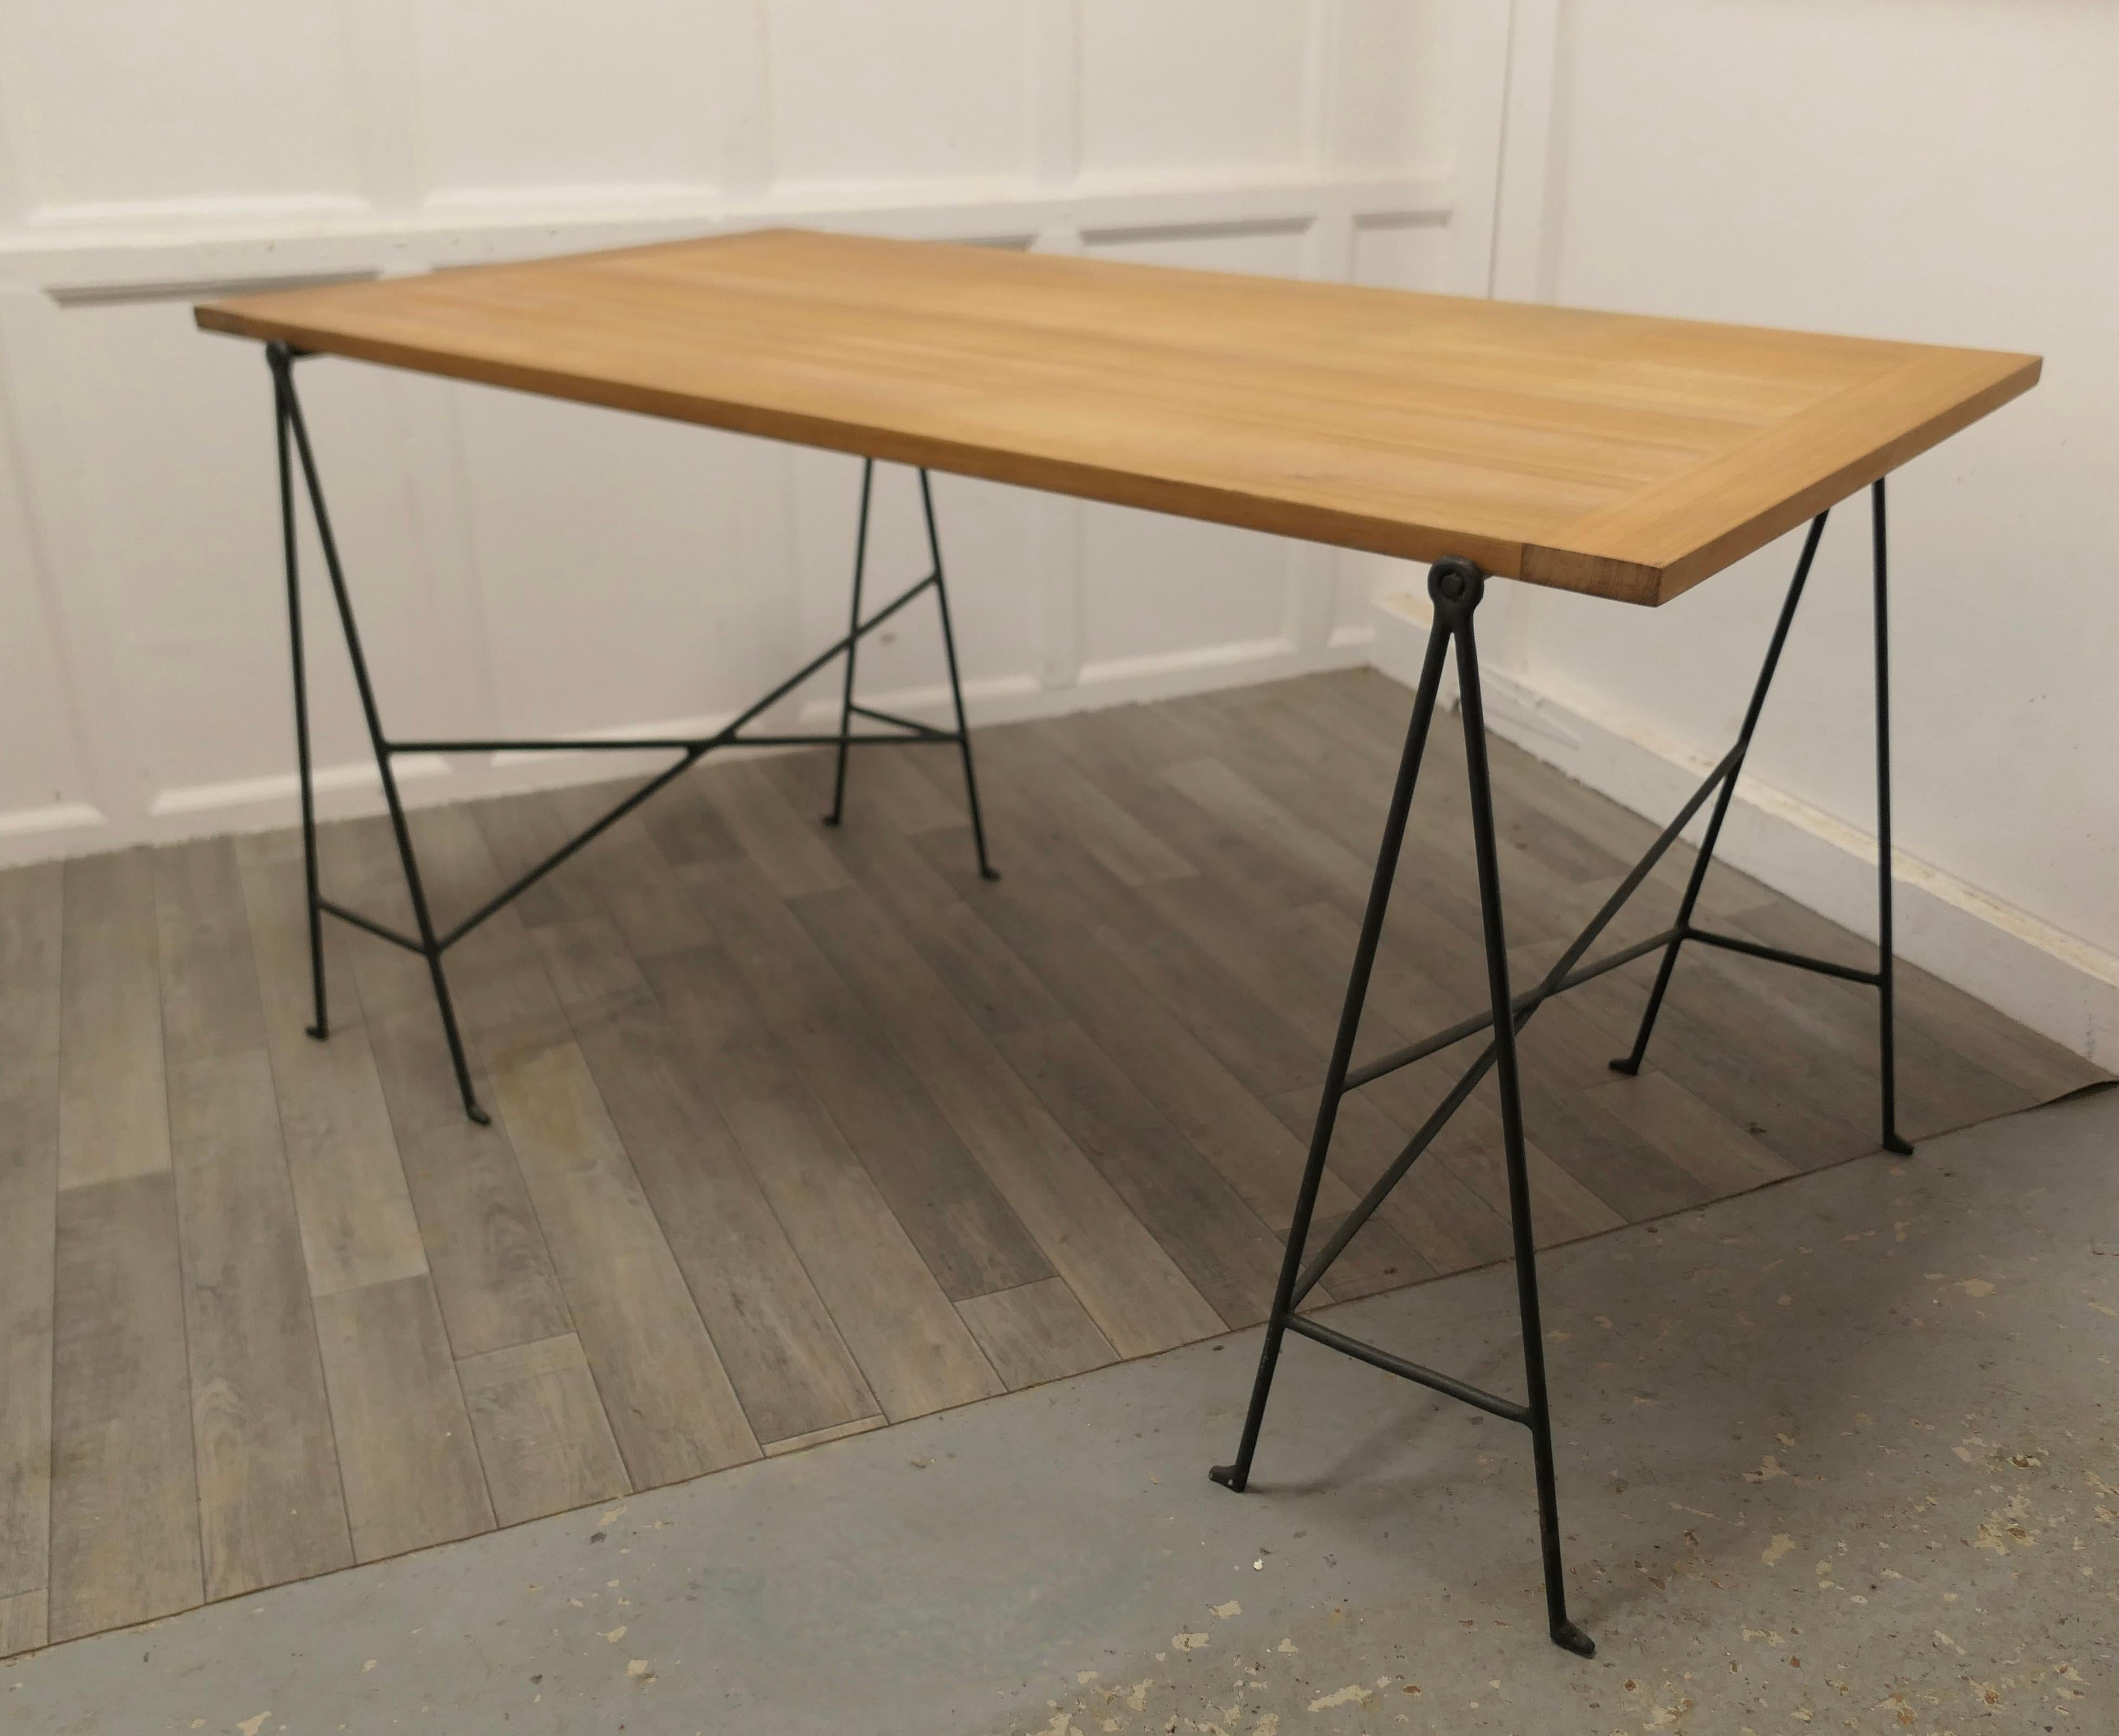 1950s Scandinavian sawhorse minimalist desk or table.

A very popular classic design from the 1950s, the solid teak top with cleated ends is supported on a pair of very stylish metal sawhorse legs
The table will seat 6 comfortably or it makes a